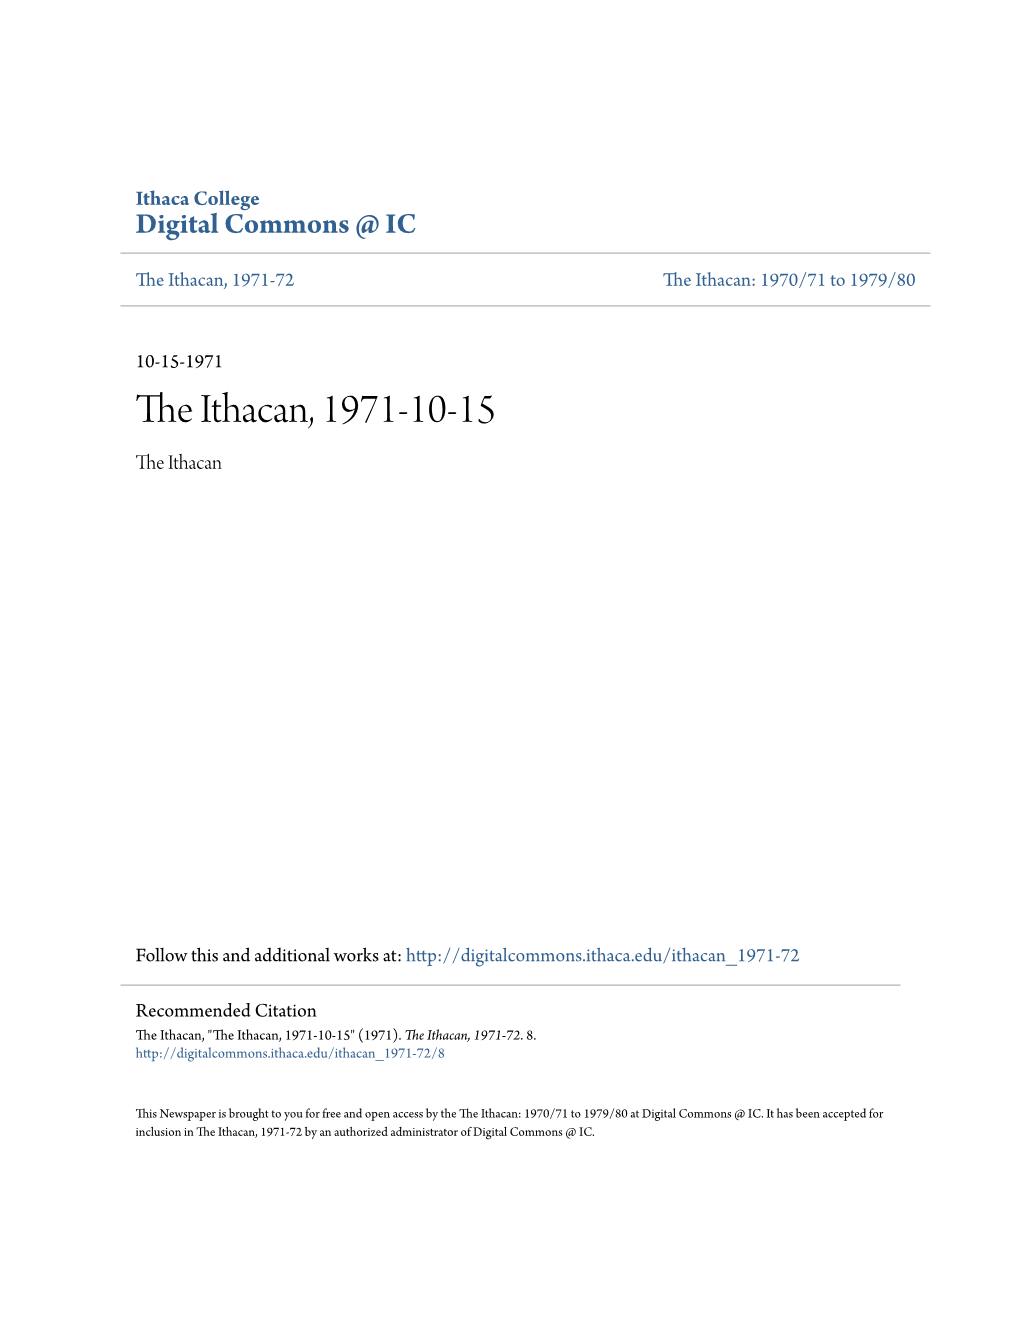 The Ithacan, 1971-10-15